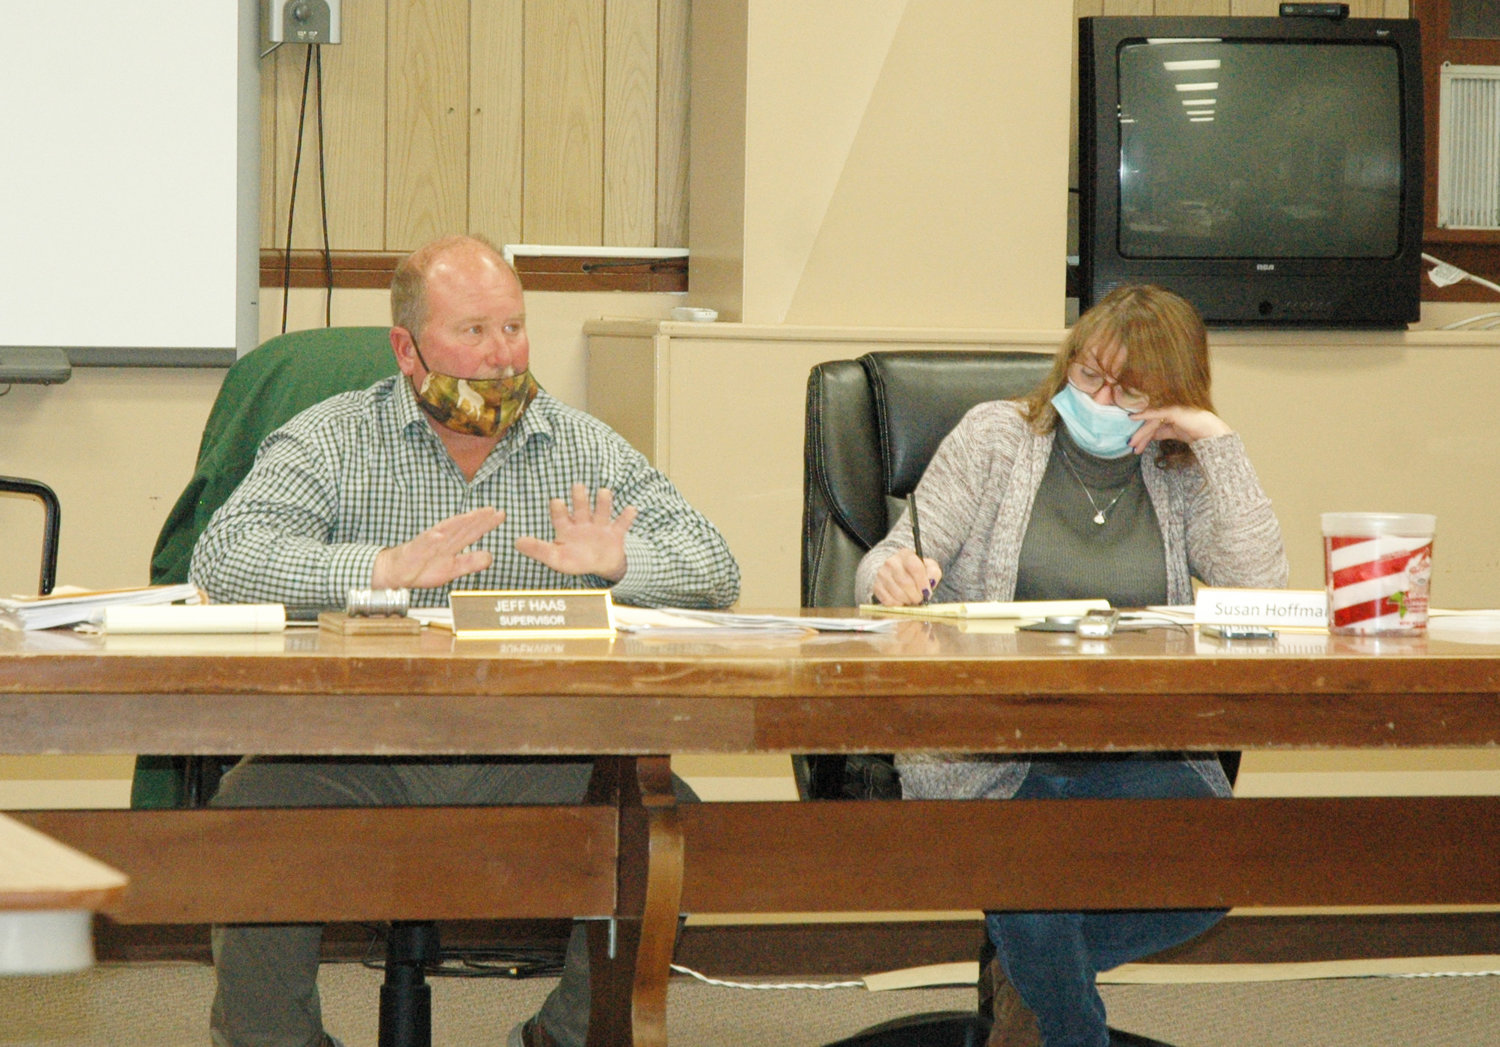 Highland Supervisor Donald Jeff Haas, left, is pictured here next to Town Clerk Susan Hoffman at their town board meeting earlier this month.